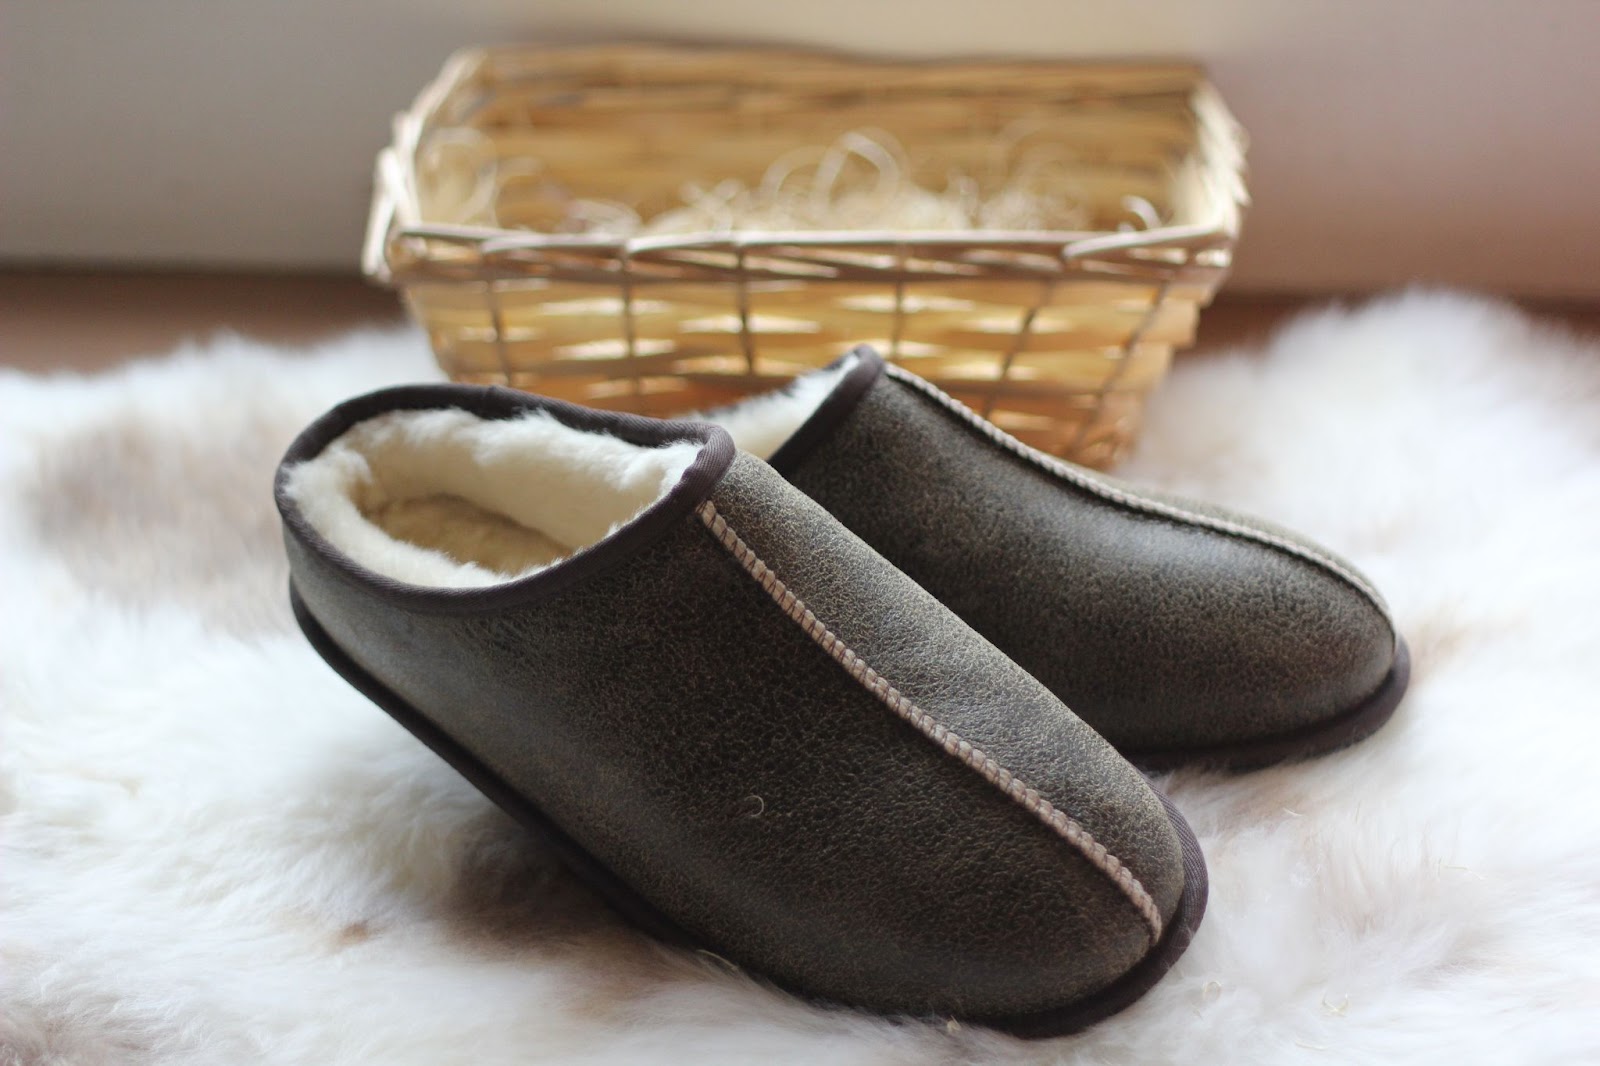 Men’s Brown Sheepskin Mule Slippers with a leather finish on a sheepskin rug